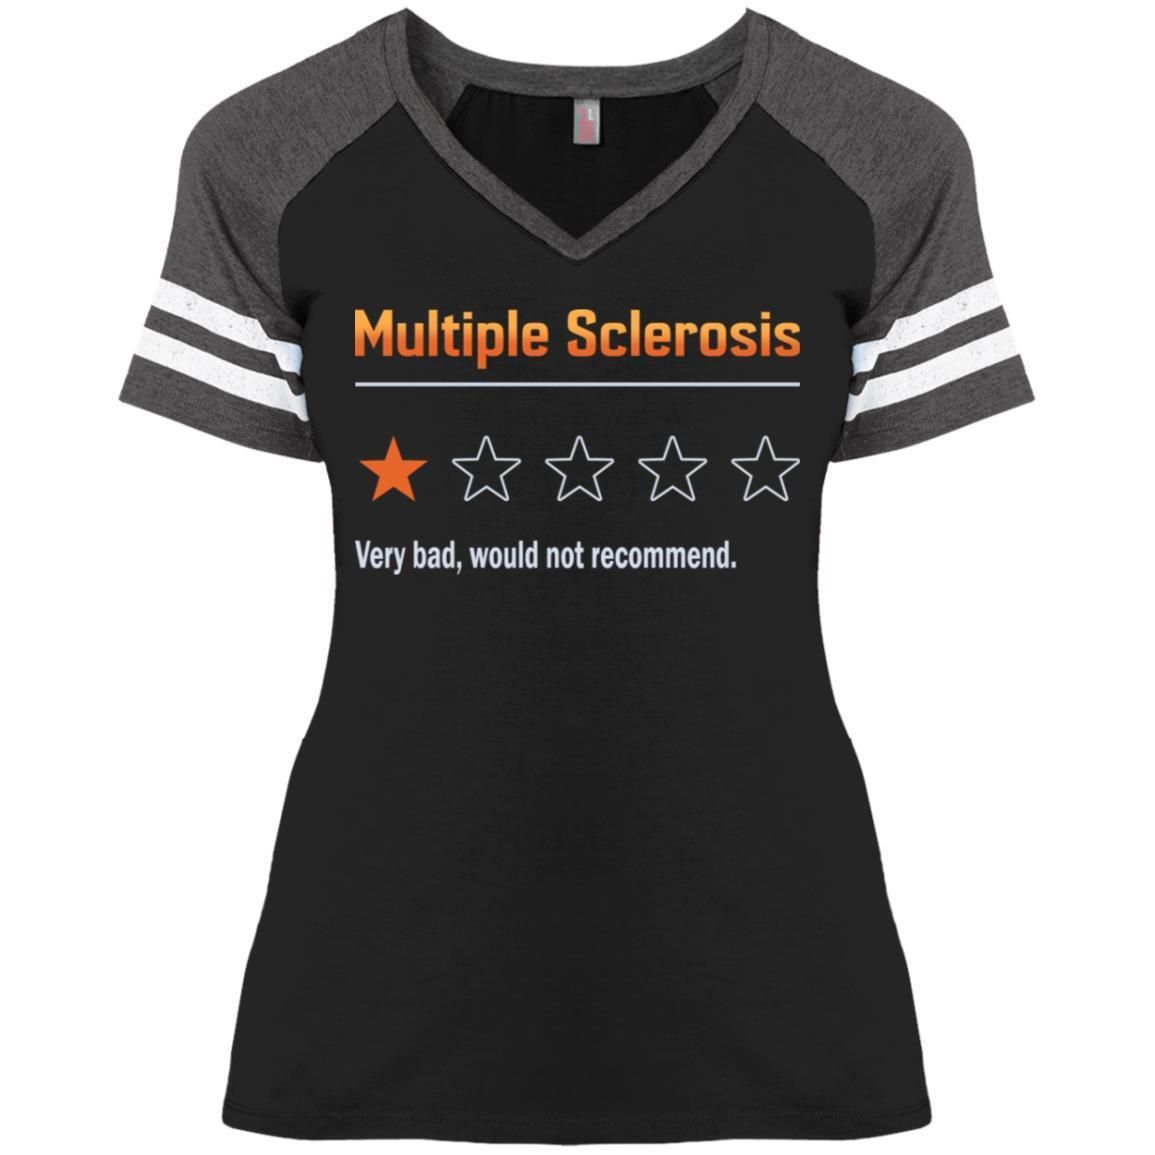 Multiple Sclerosis Very Bad Would Not Recommend shirts